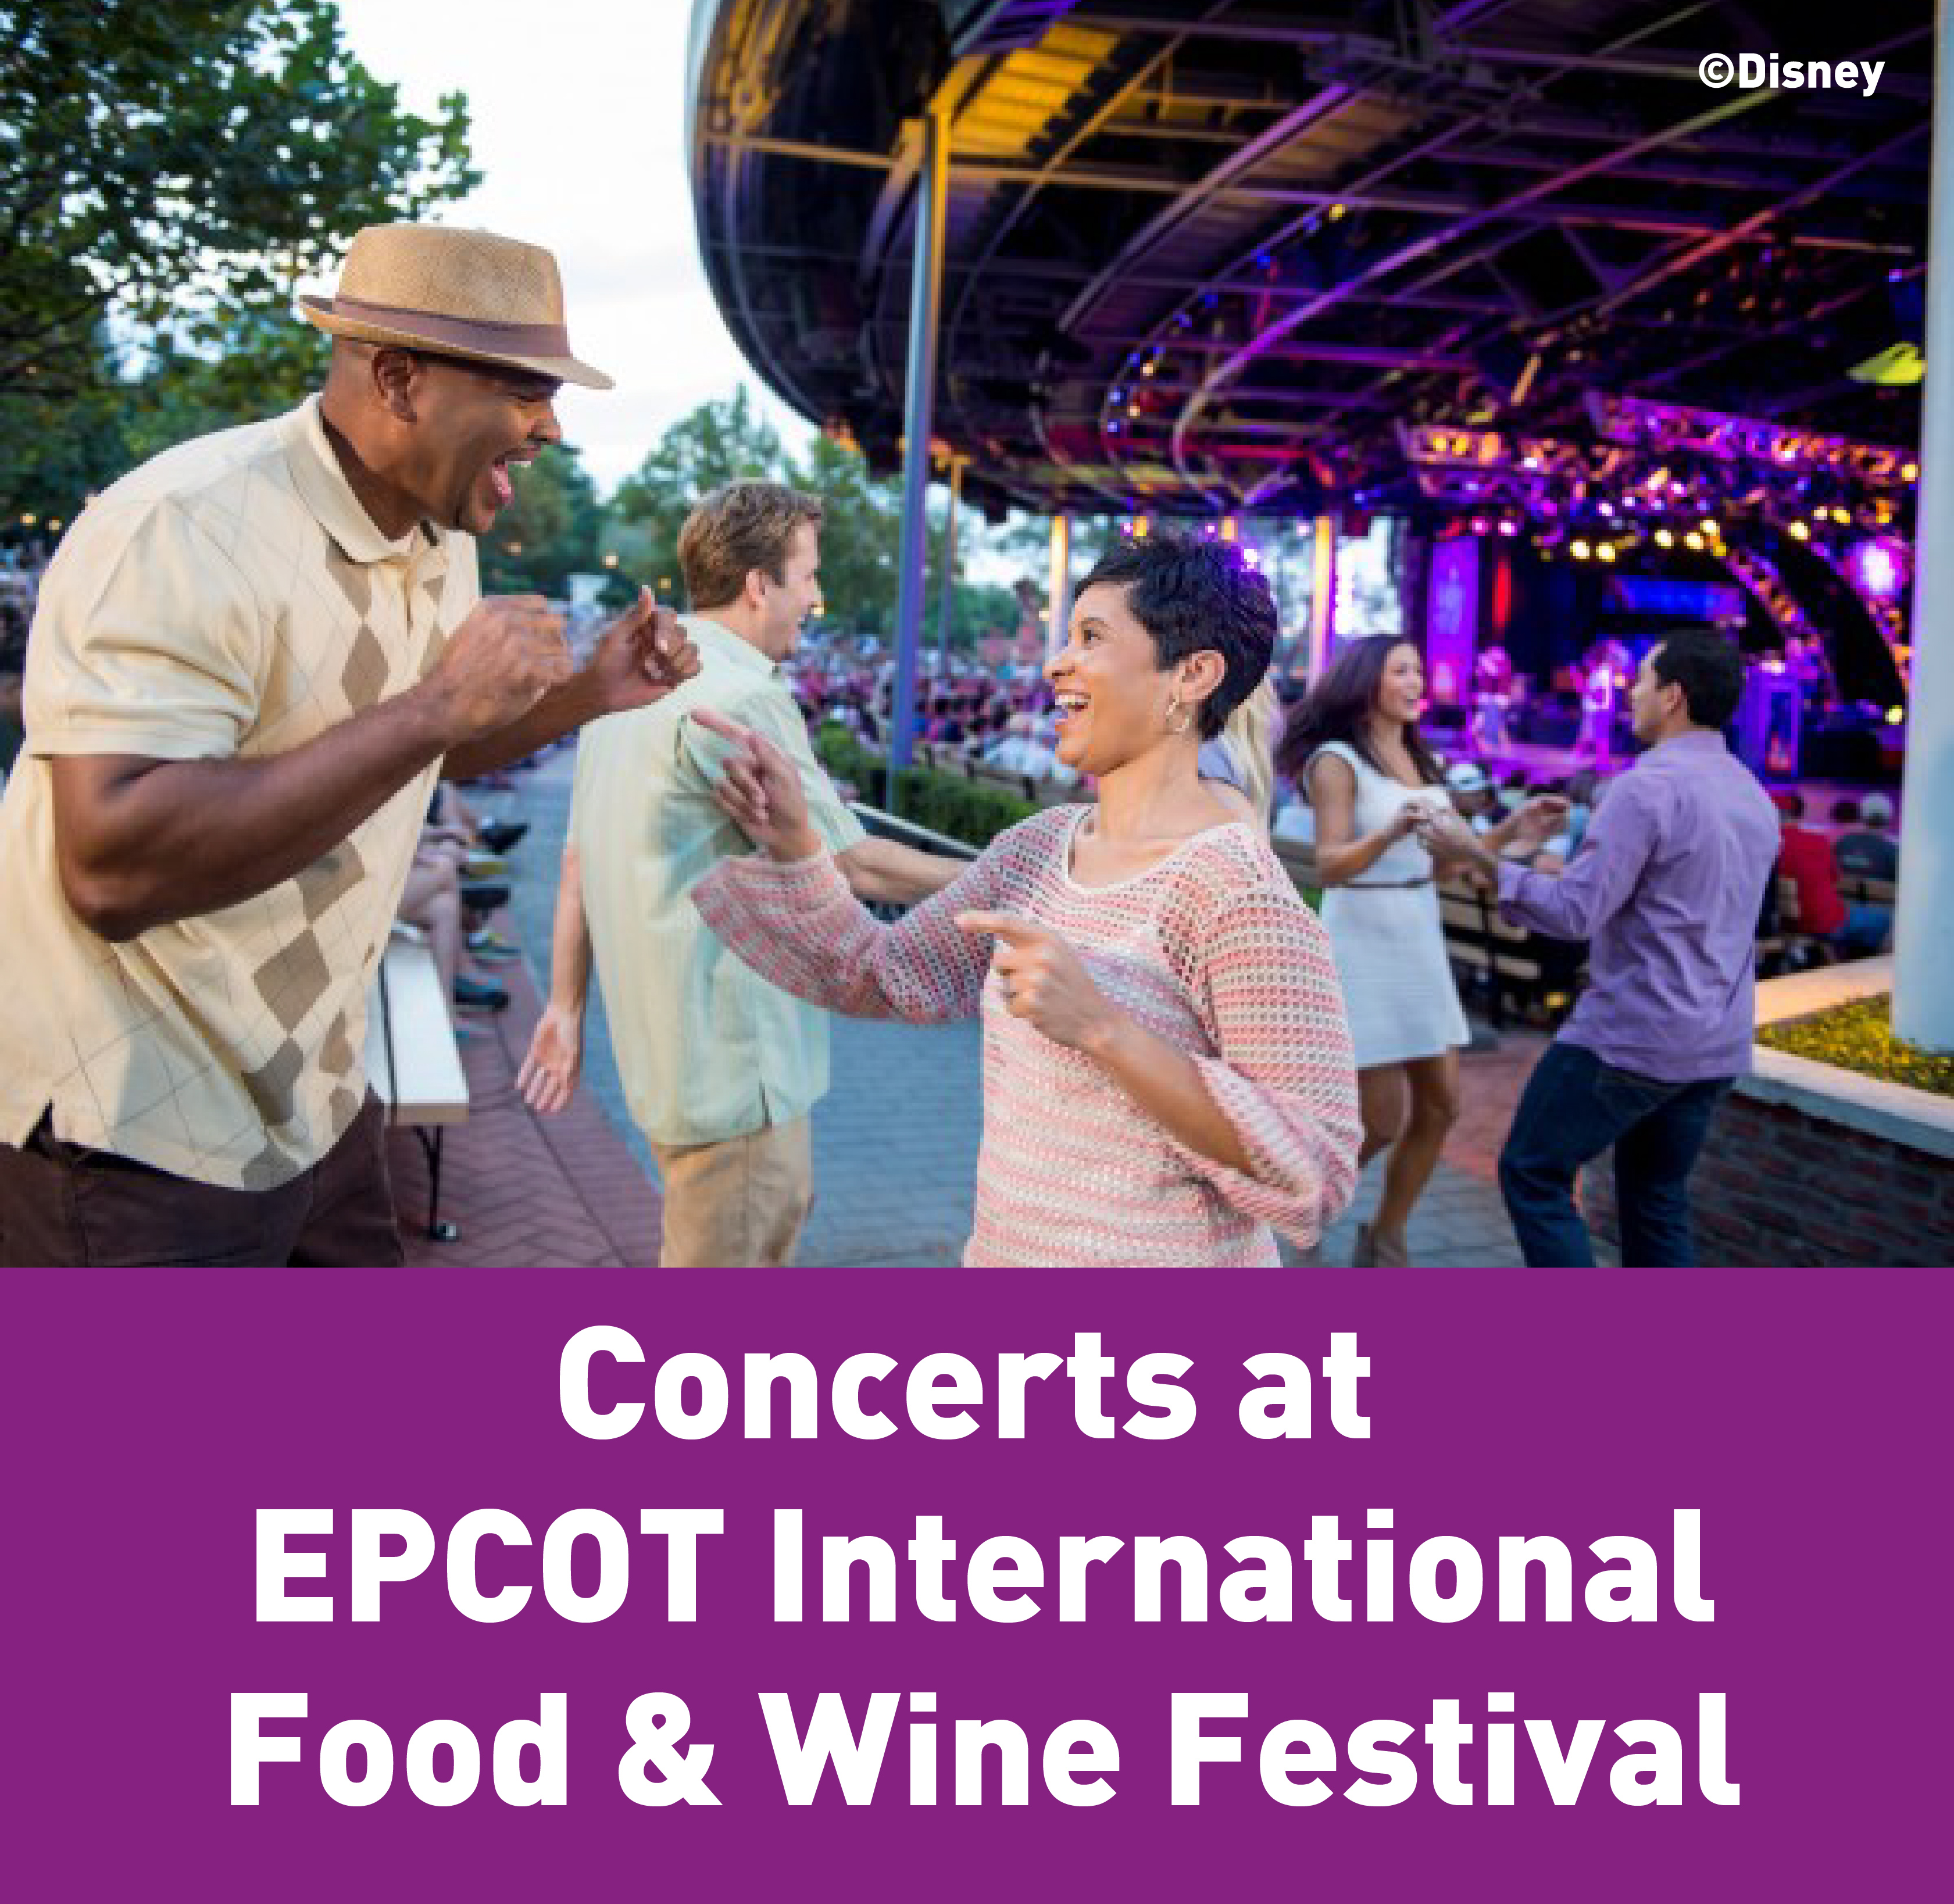 Concerts at Epcot international food & wine festival